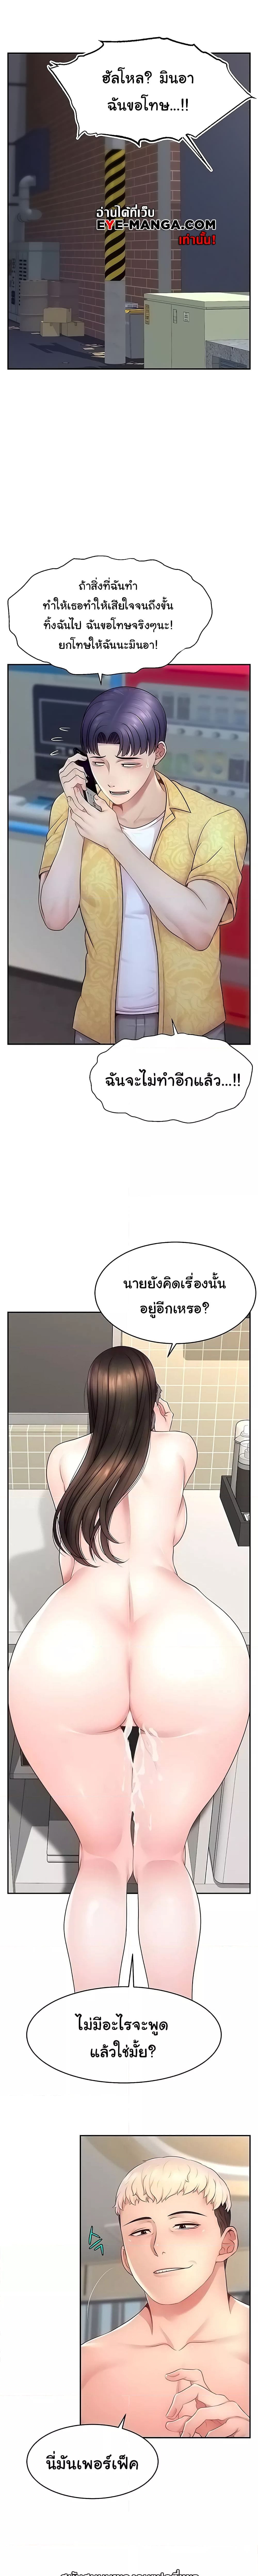 Making Friends With Streamers by Hacking! ตอนที่ 12 ภาพ 0